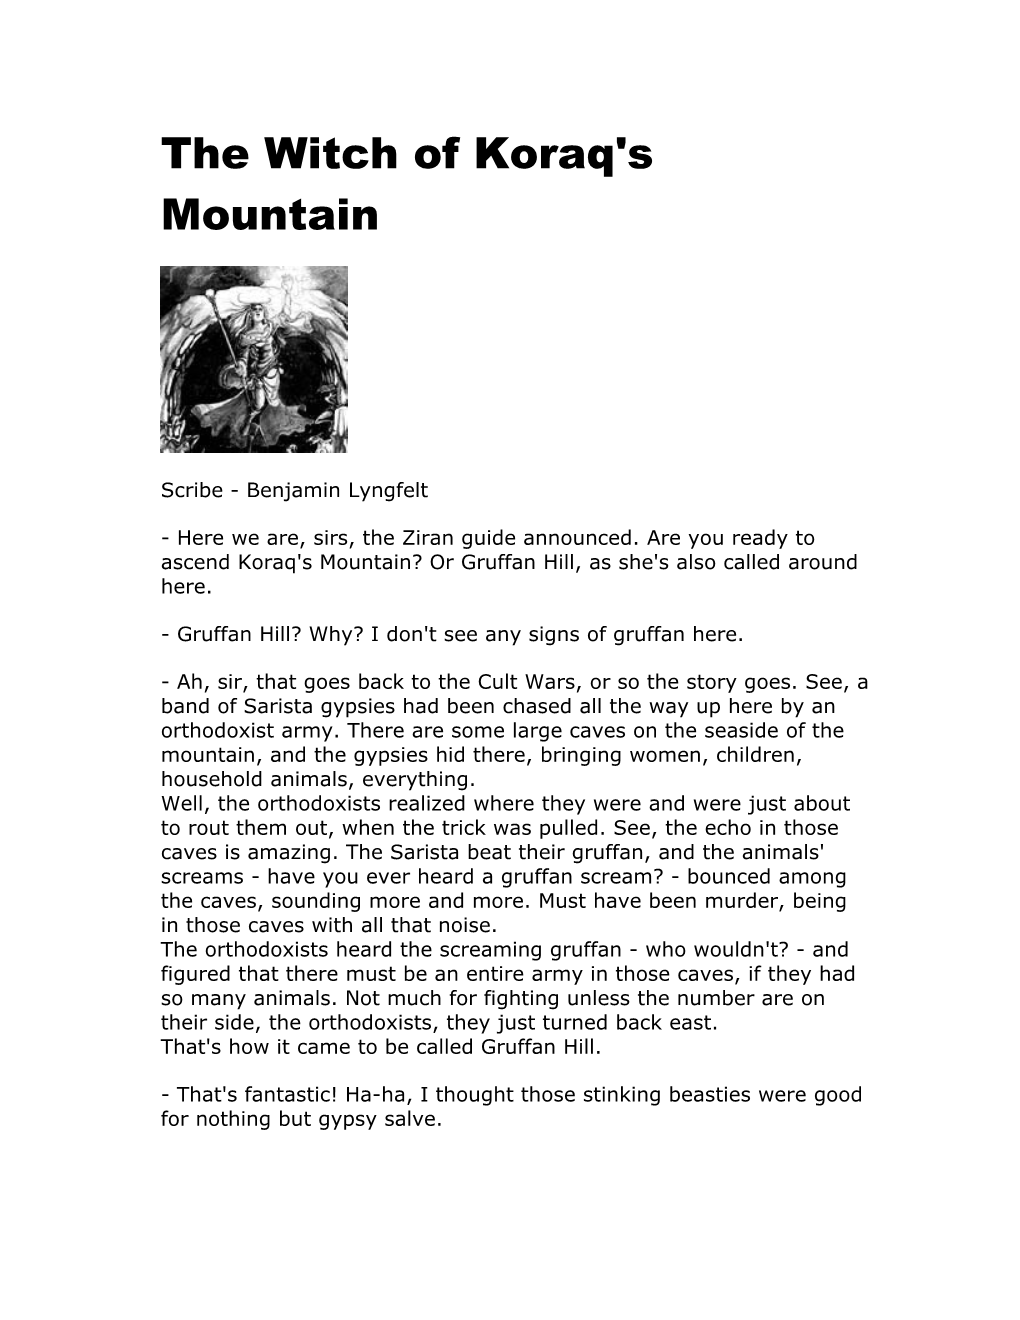 The Witch of Koraq's Mountain